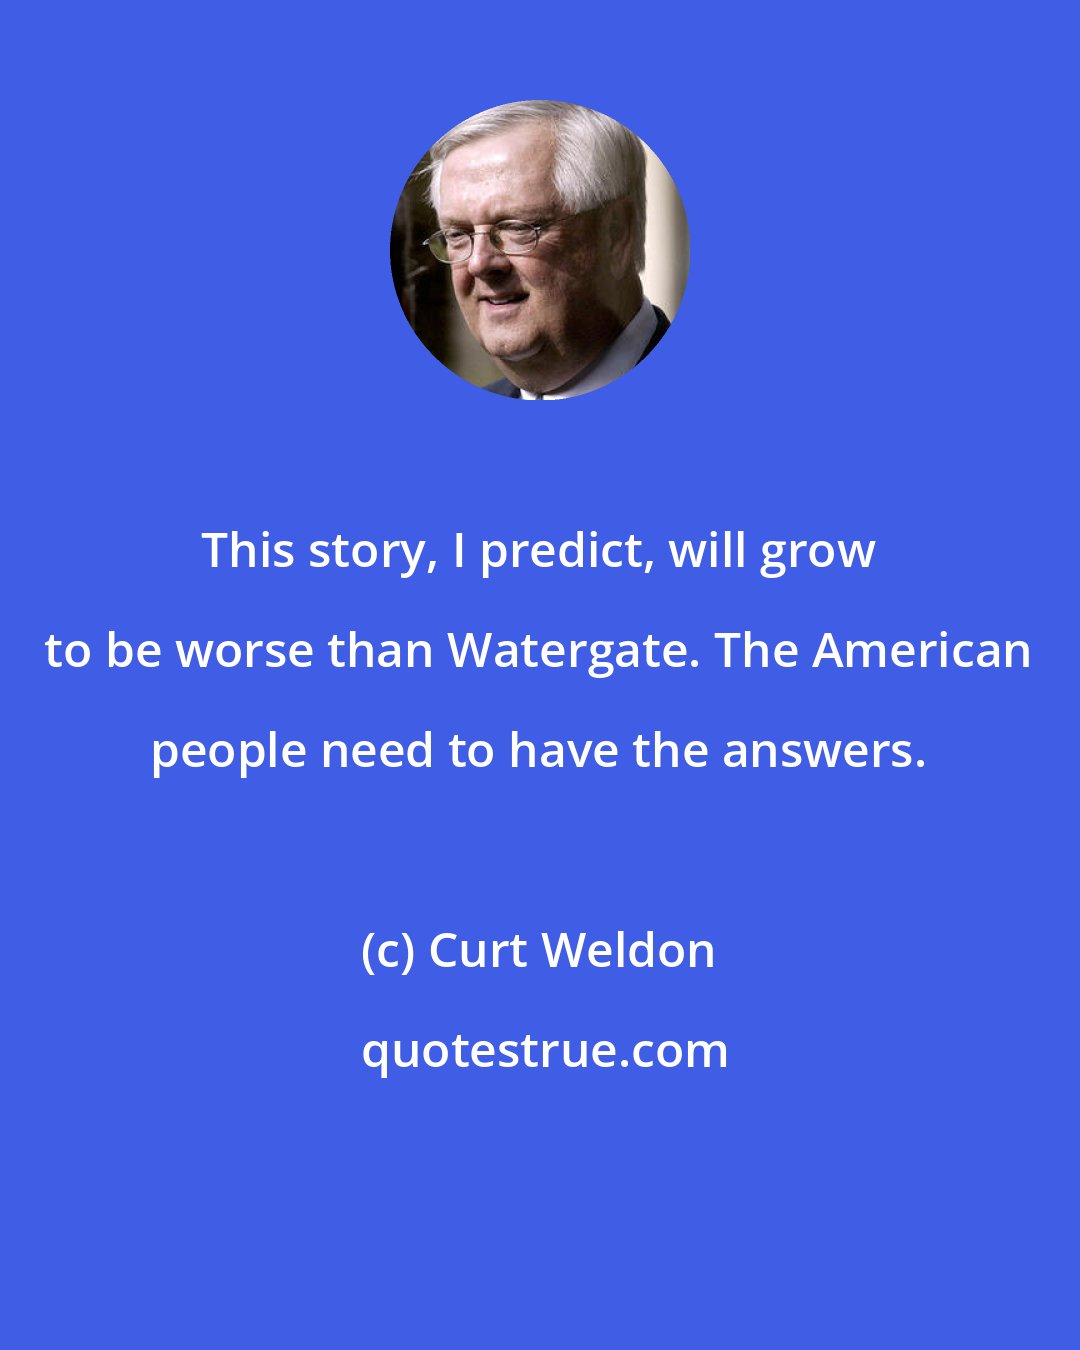 Curt Weldon: This story, I predict, will grow to be worse than Watergate. The American people need to have the answers.